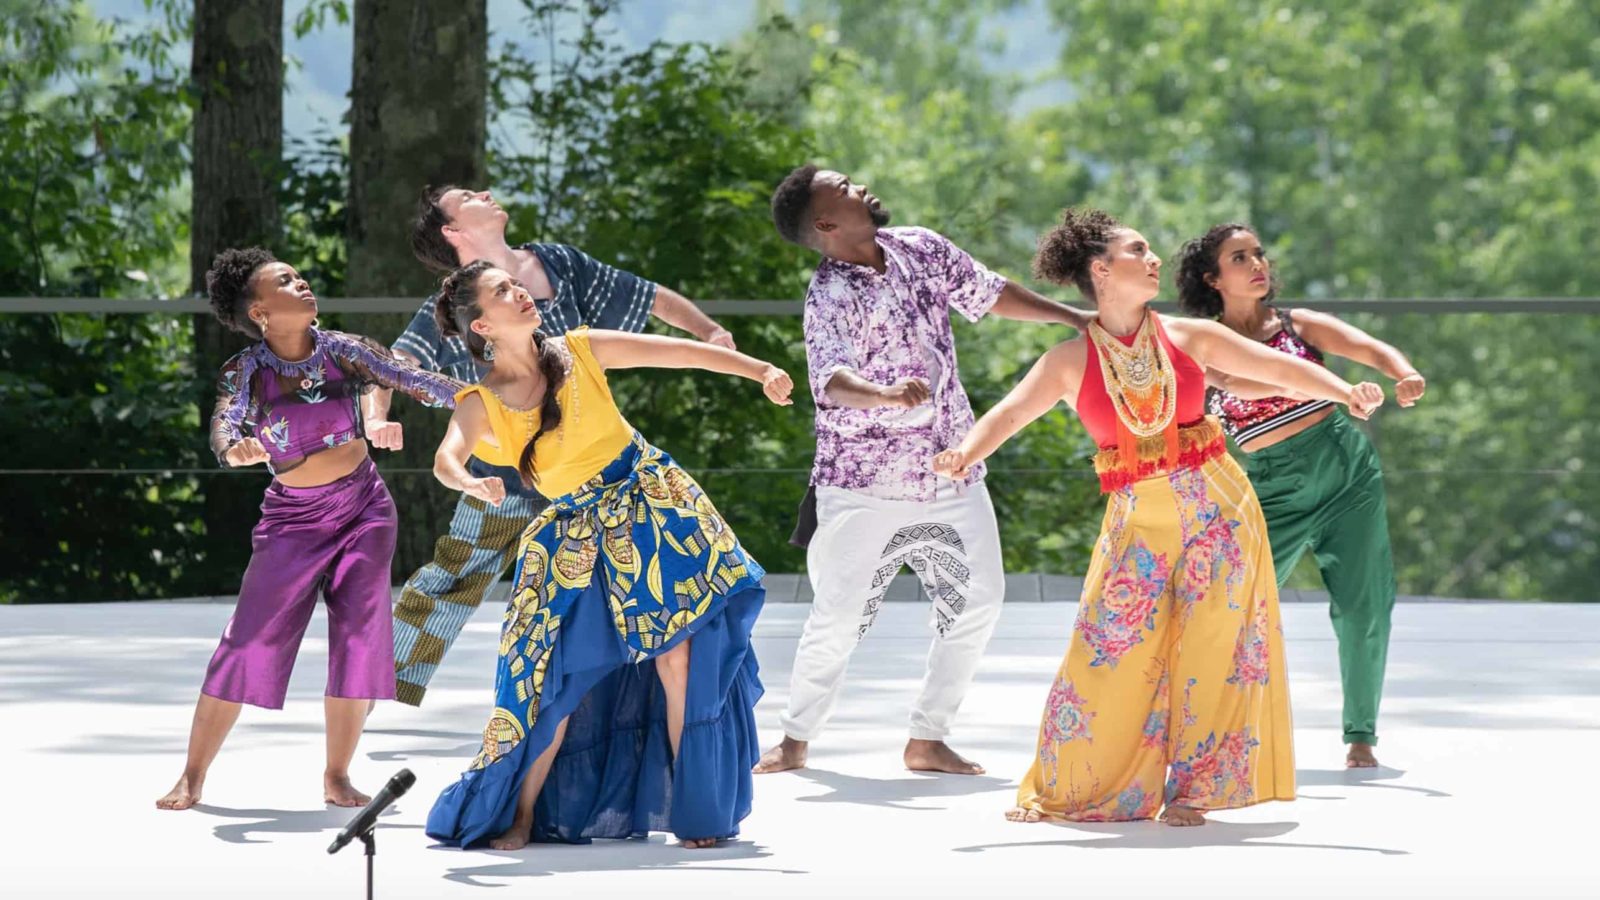 Contra-Tiempo will perform at Jacob's Pillow Dance Festival. Press photo courtesy of the Pillow.